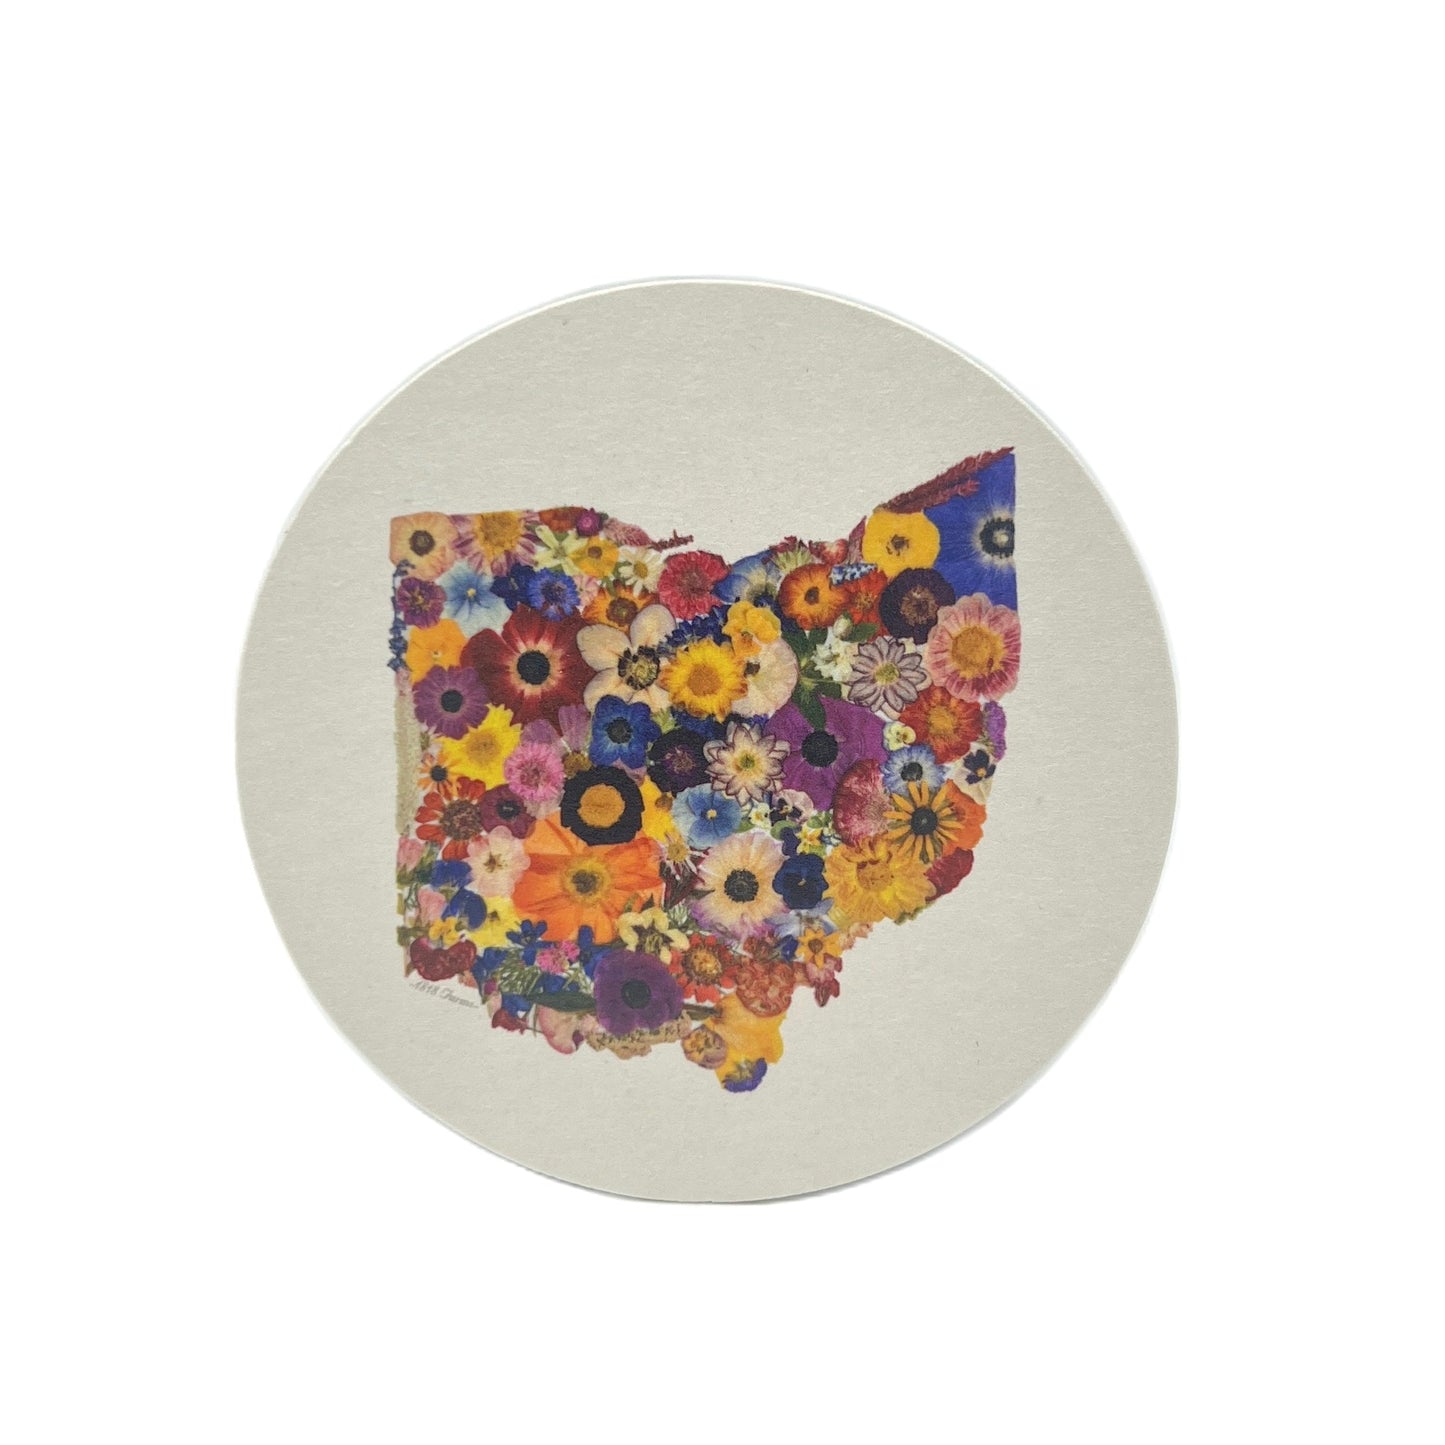 State Themed Drink Coasters (Set of 6)  - "Where I Bloom" Collection Coaster 1818 Farms Ohio  